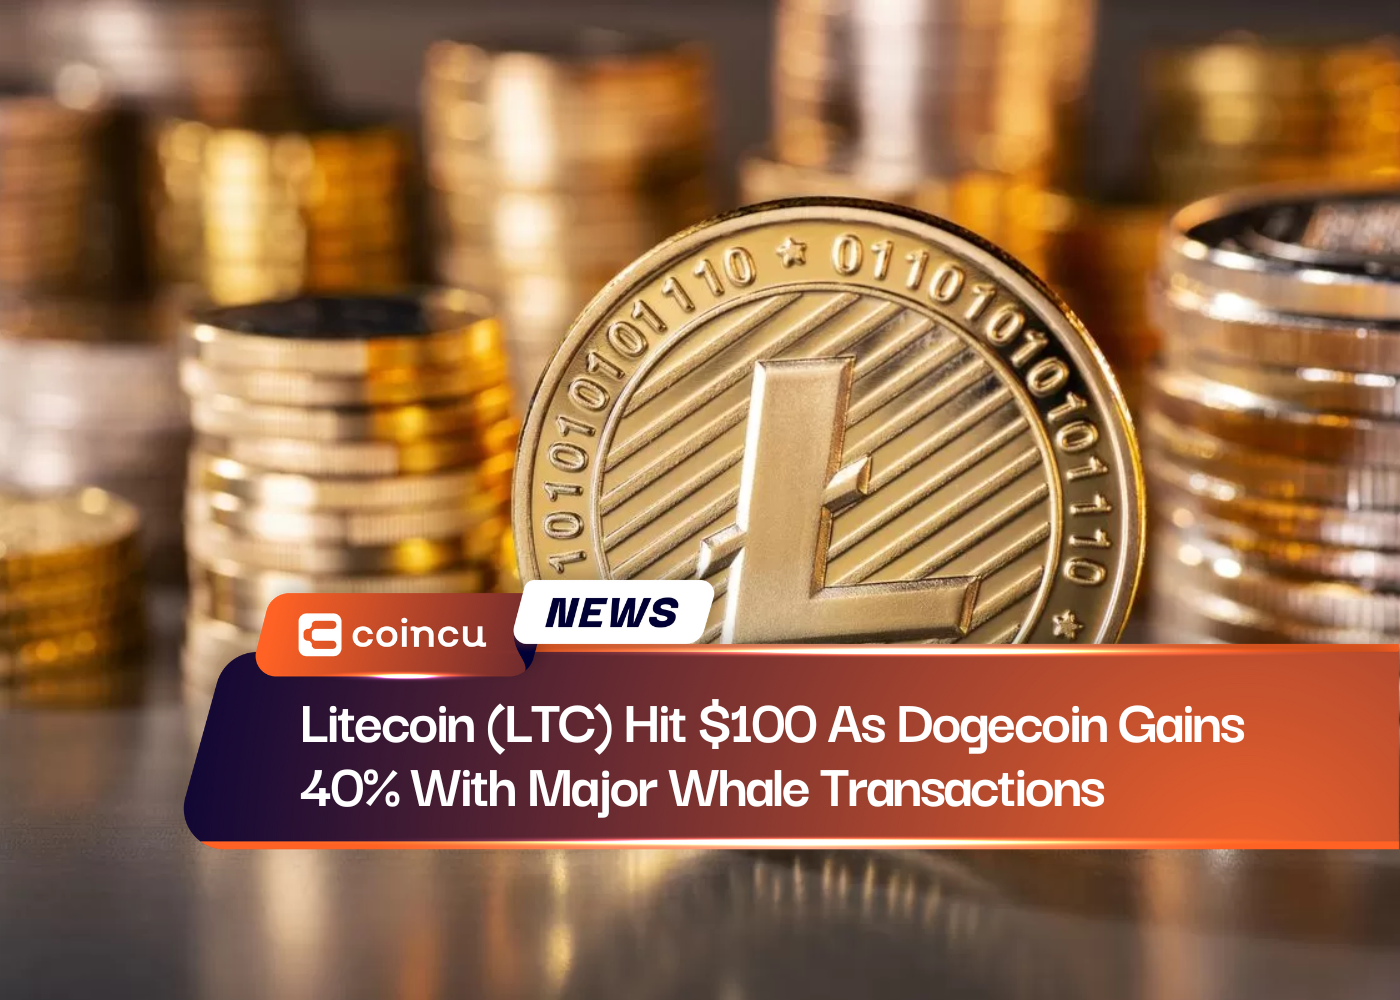 Litecoin (LTC) Hit $100 As Dogecoin Gains 40% With Major Whale Transactions